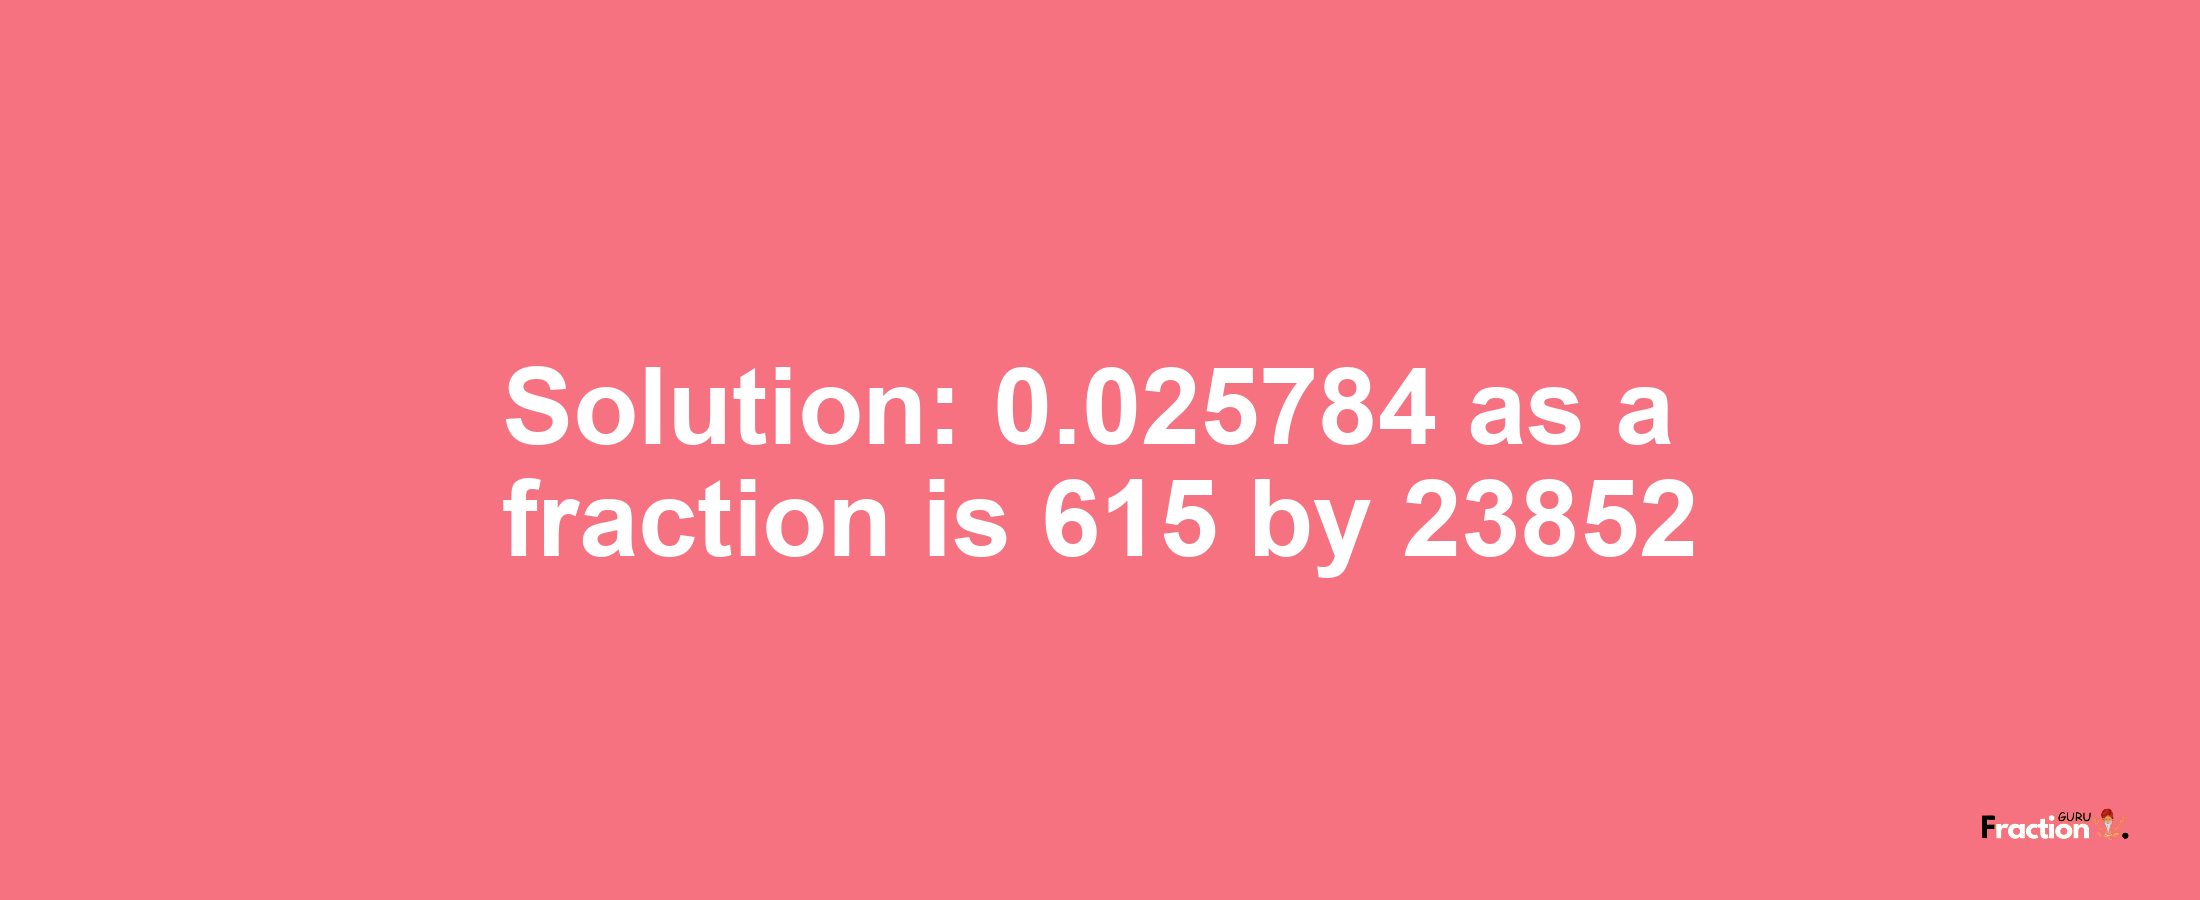 Solution:0.025784 as a fraction is 615/23852